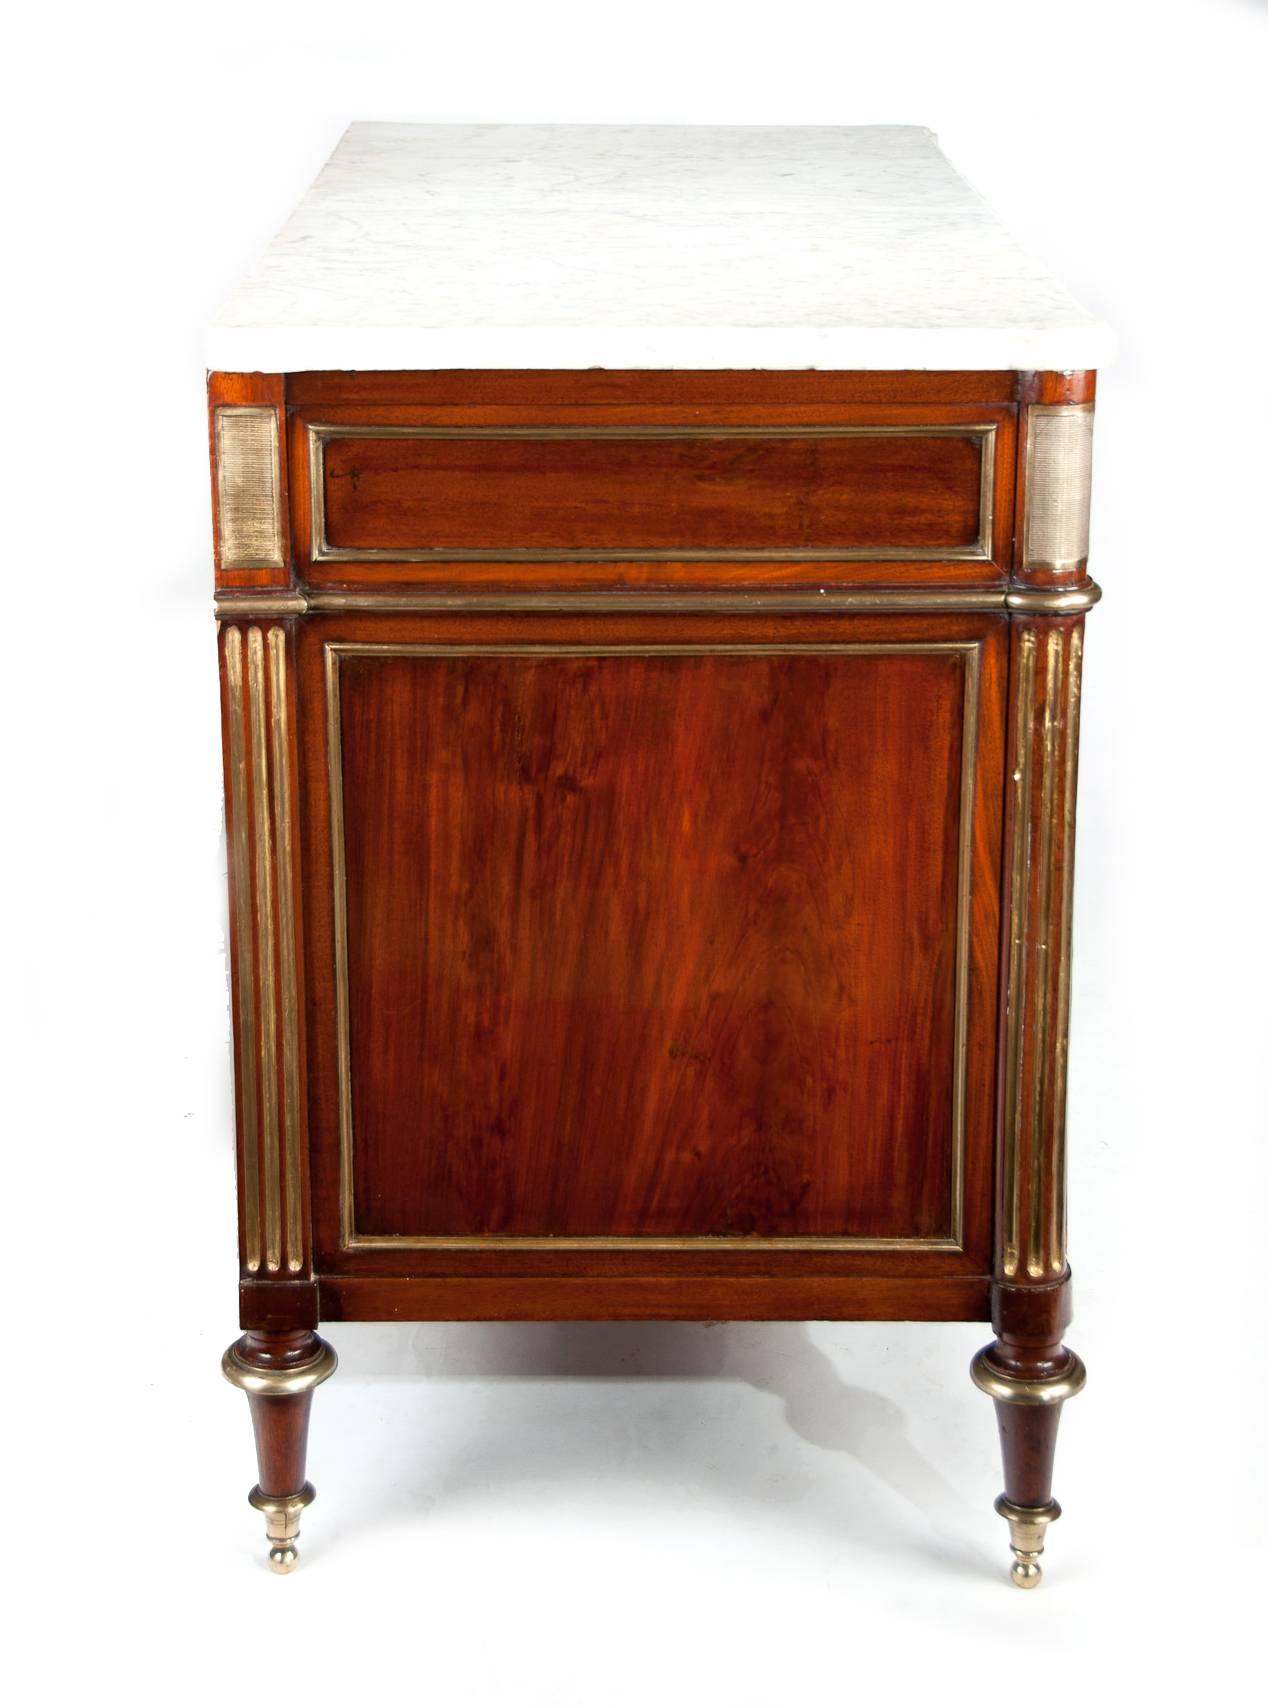 Fine Quality Late 18th Century Directoire Period Mahogany Commode 2